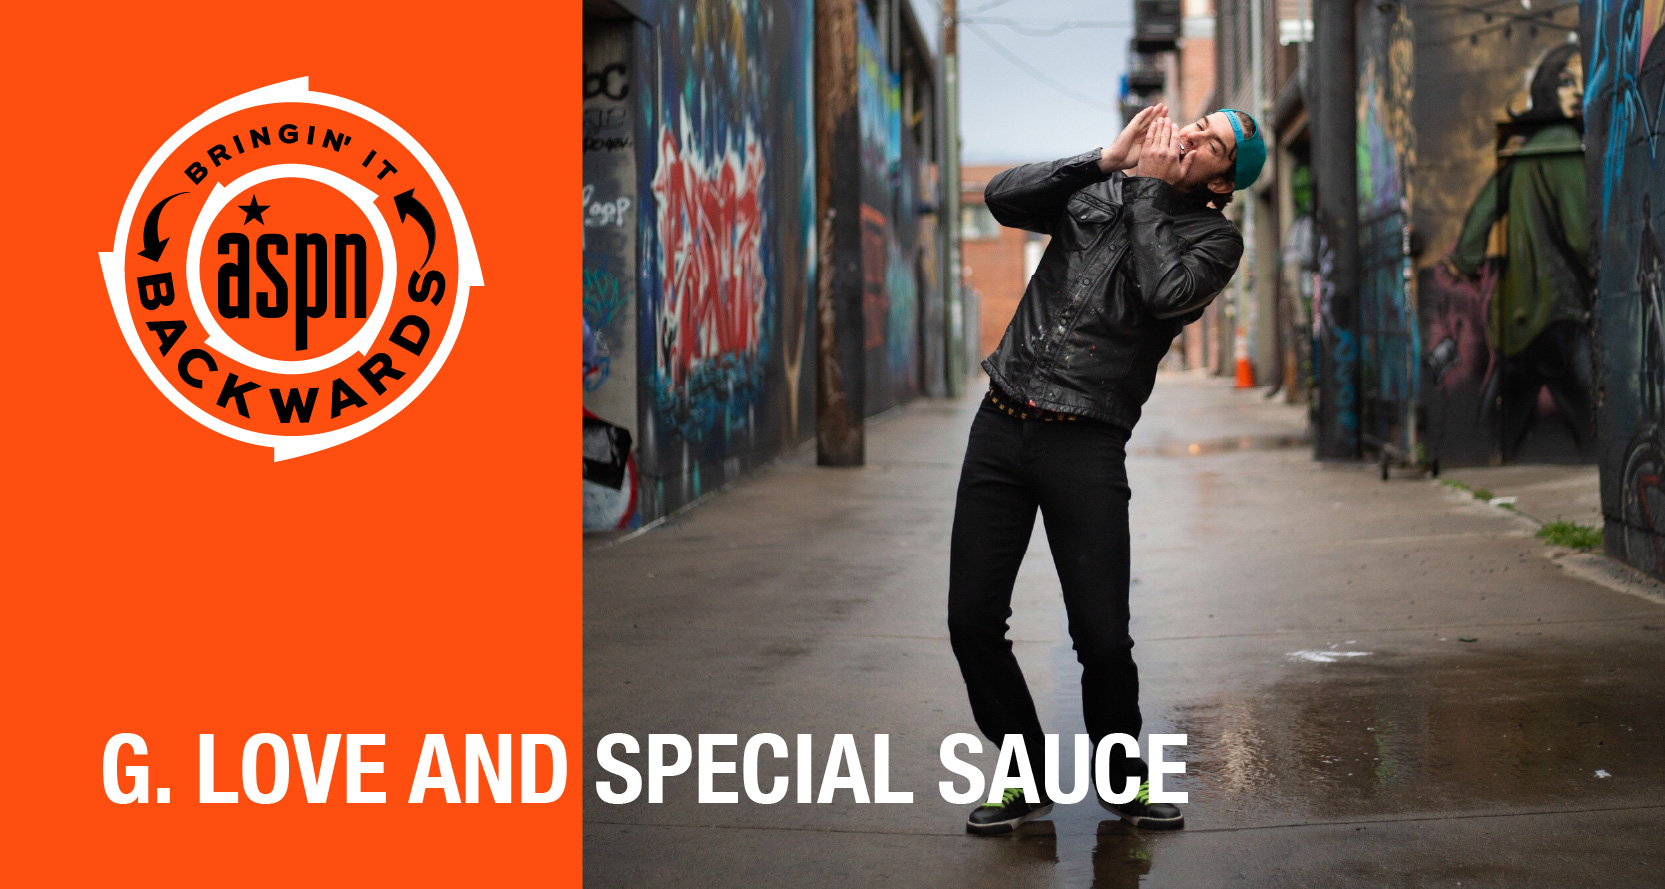 Bringin’ it  Backwards: Interview with G. Love and Special Sauce